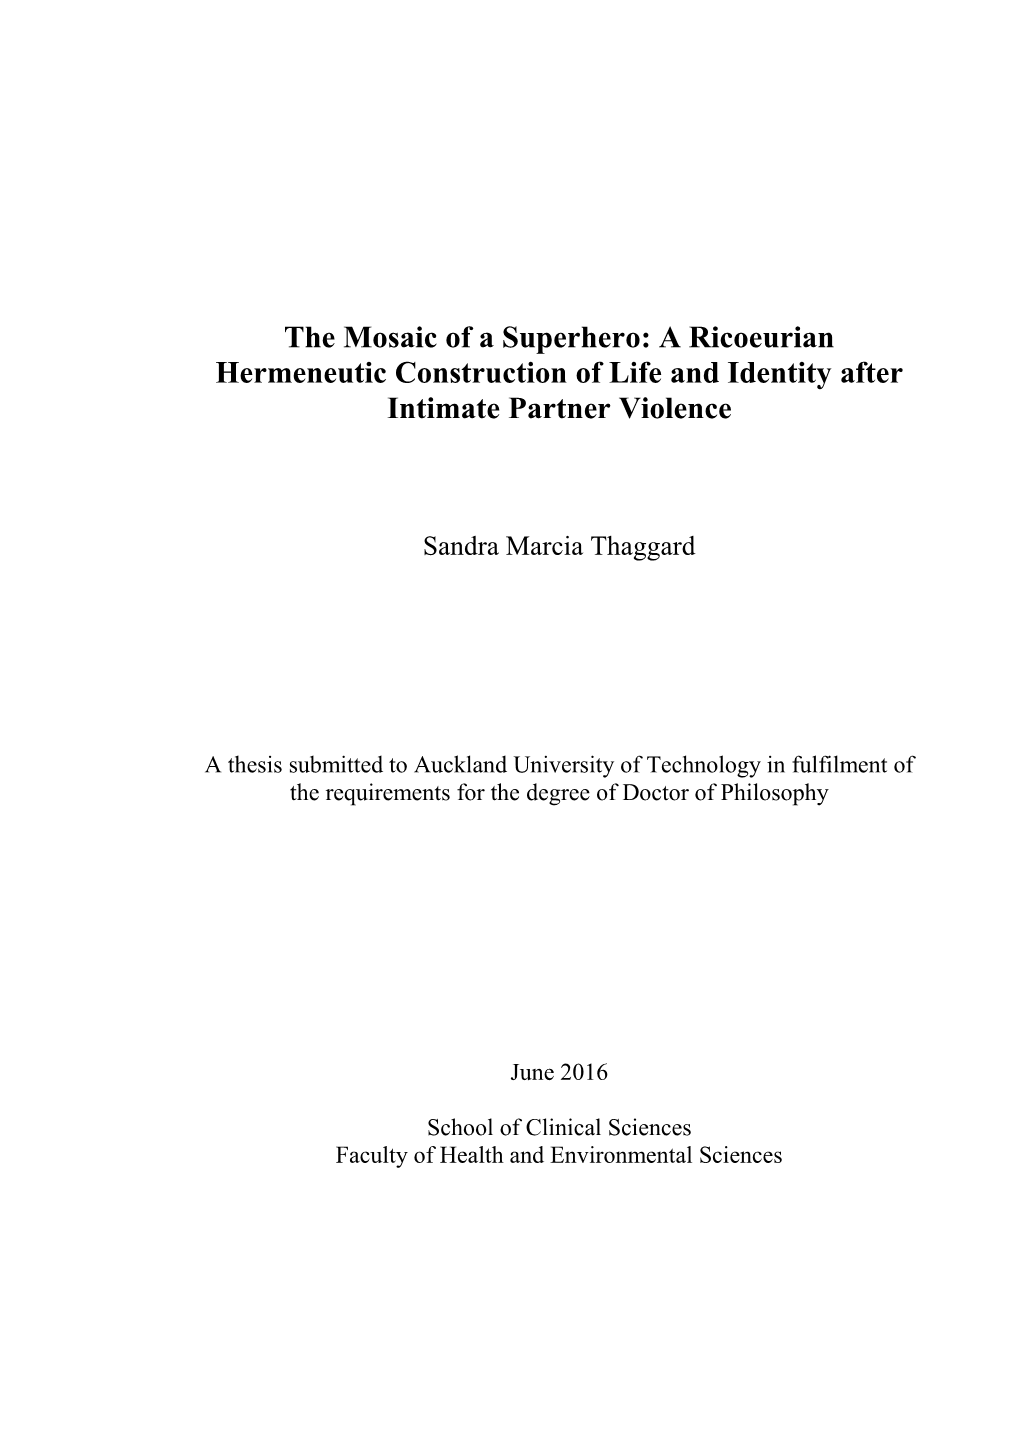 The Mosaic of a Superhero: a Ricoeurian Hermeneutic Construction of Life and Identity After Intimate Partner Violence